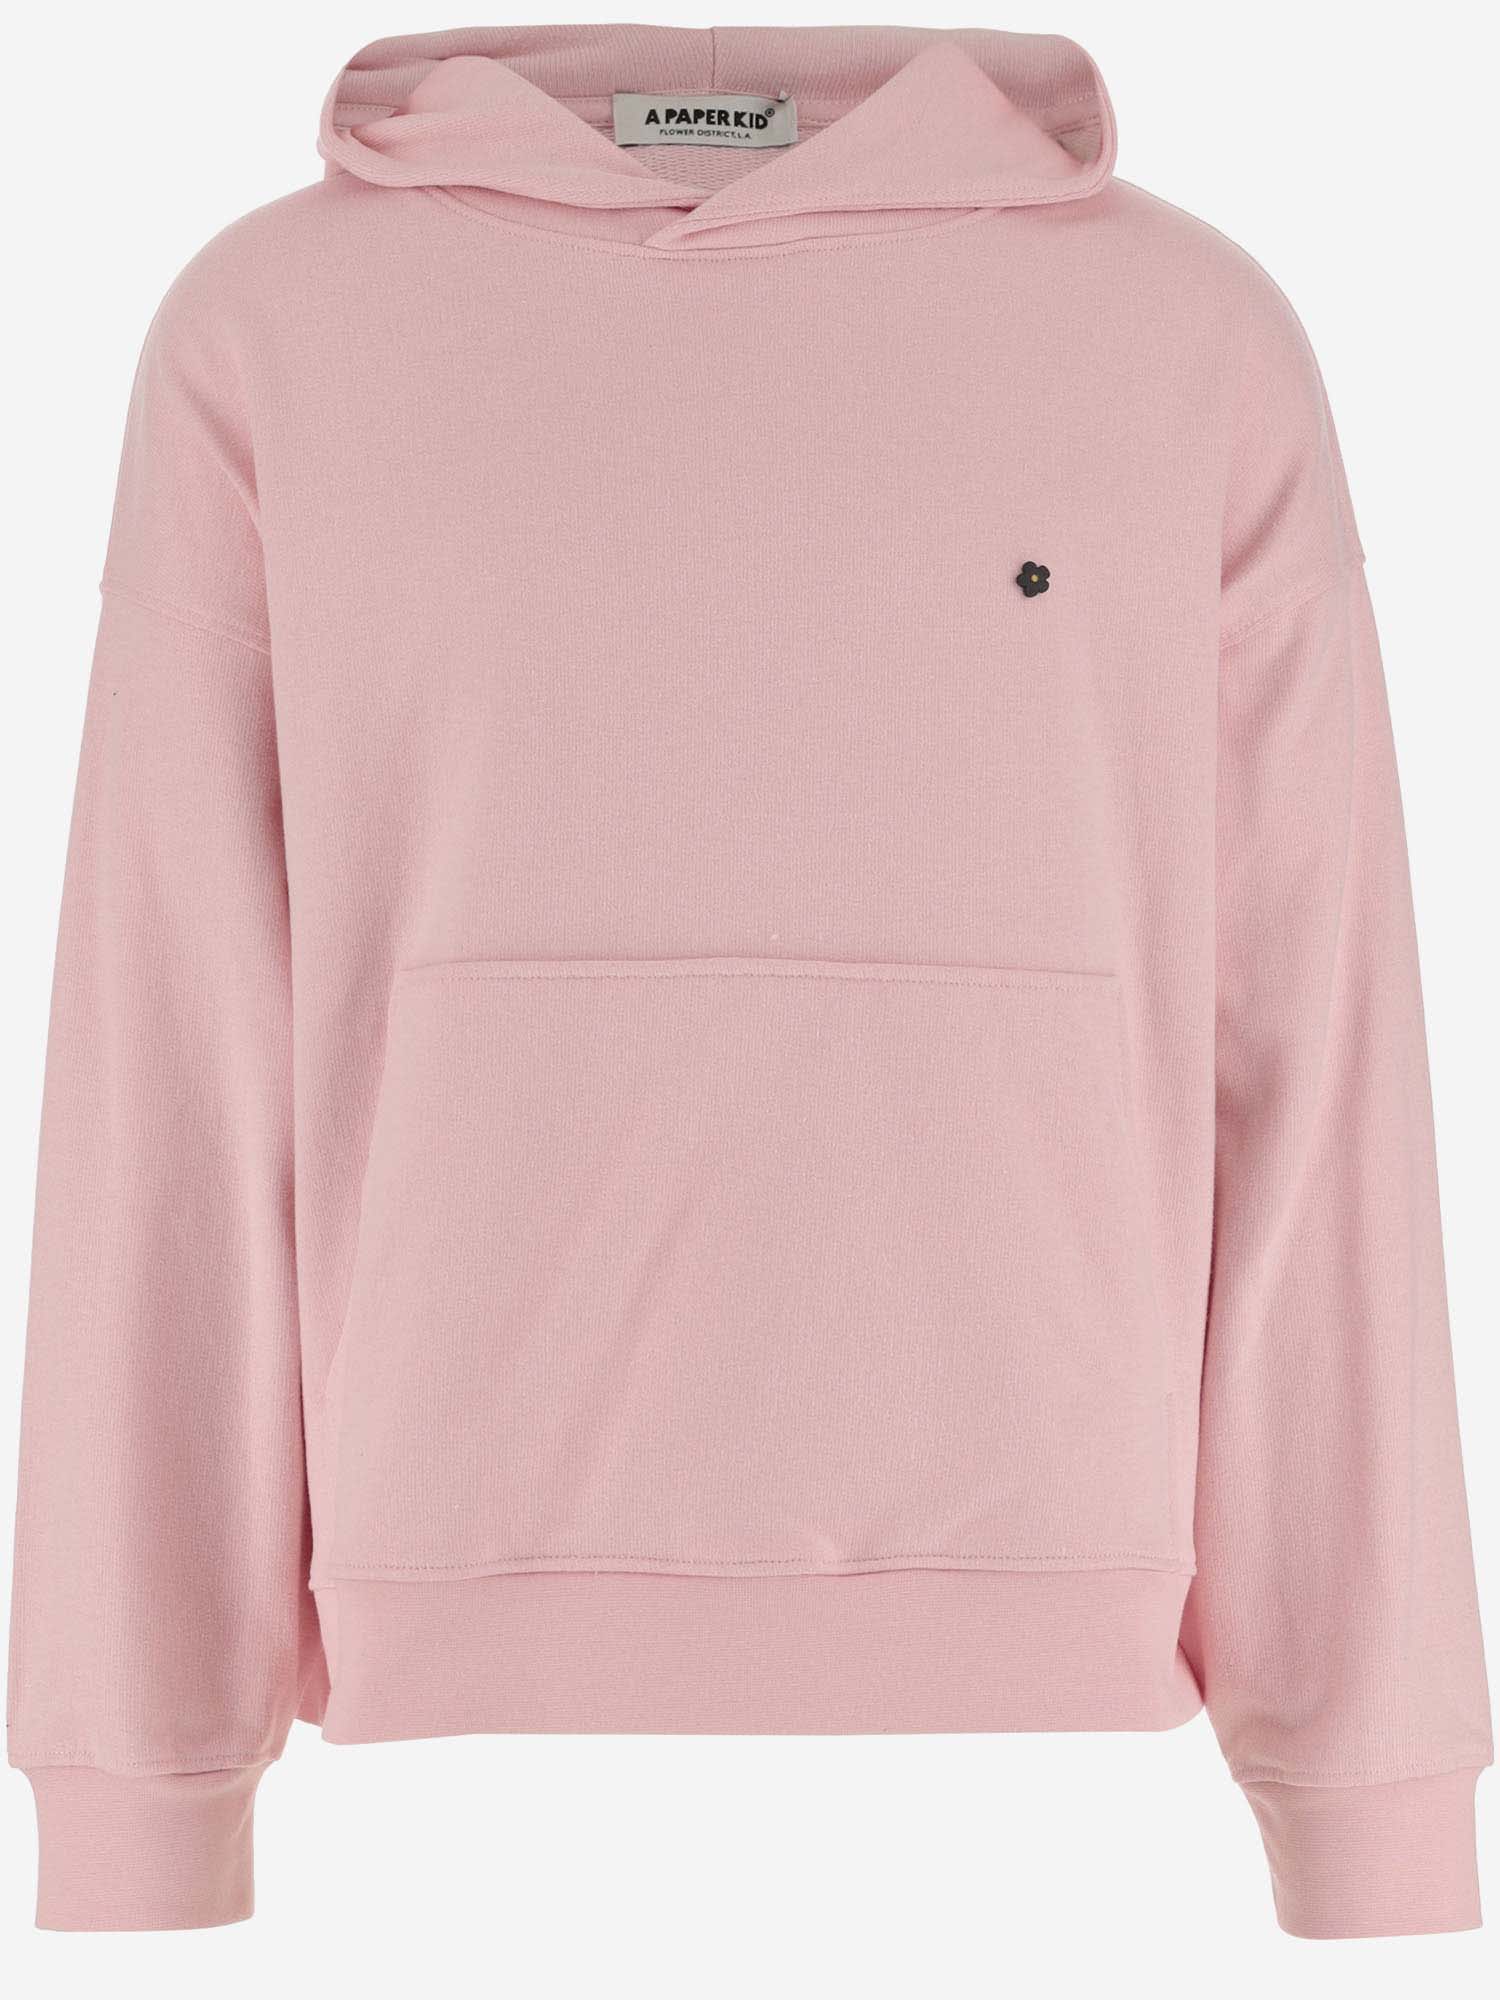 A Paper Kid Cotton Sweatshirt With Logo In Pink